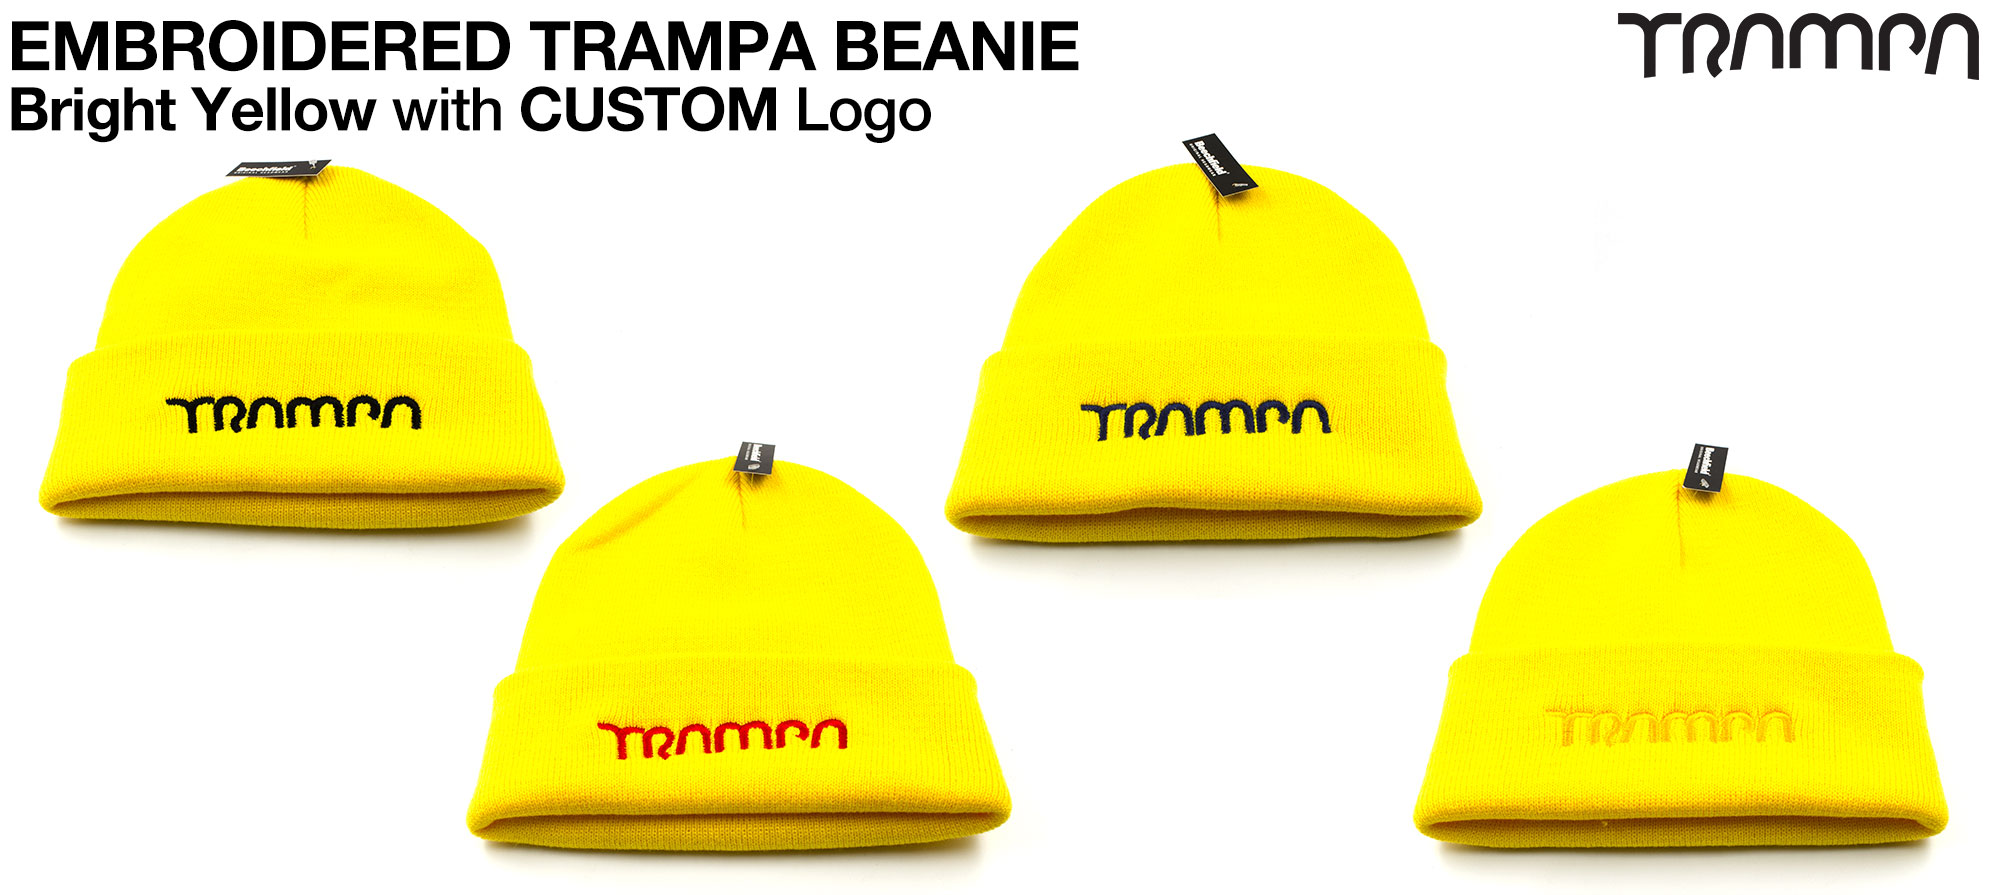 Bright YELLOW Beanie with EMBROIDERED TRAMPA logo (£12.50) (out of stock)